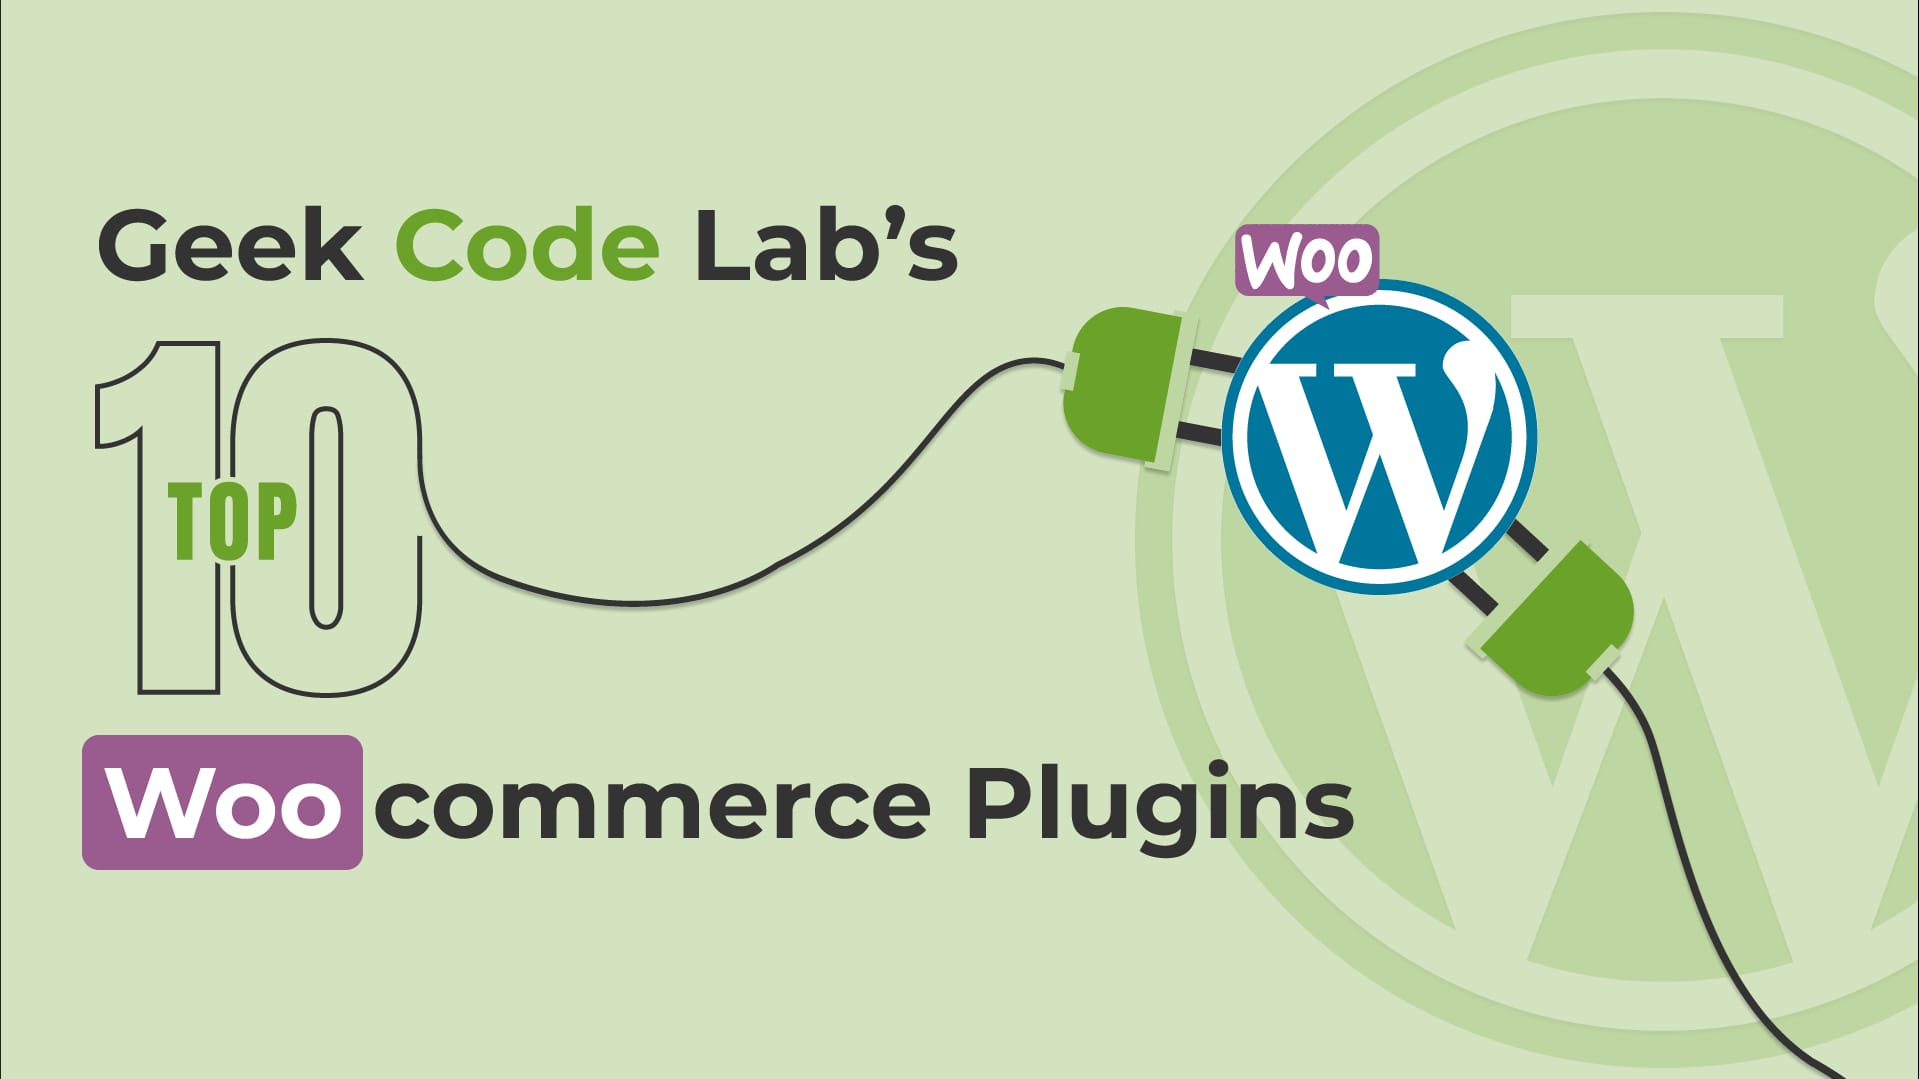 10 Best WooCommerce Plugins for Your Store